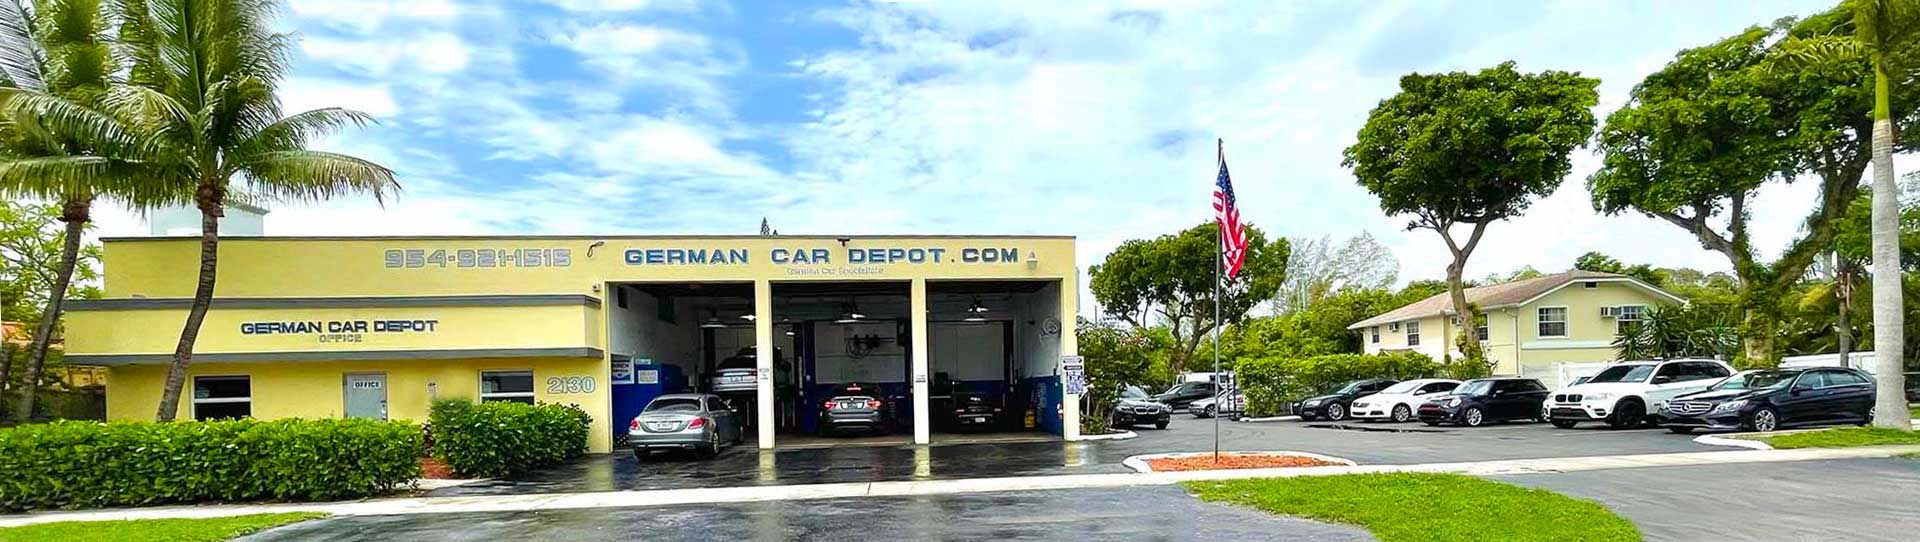 Know about the best car service and repair experts in FL